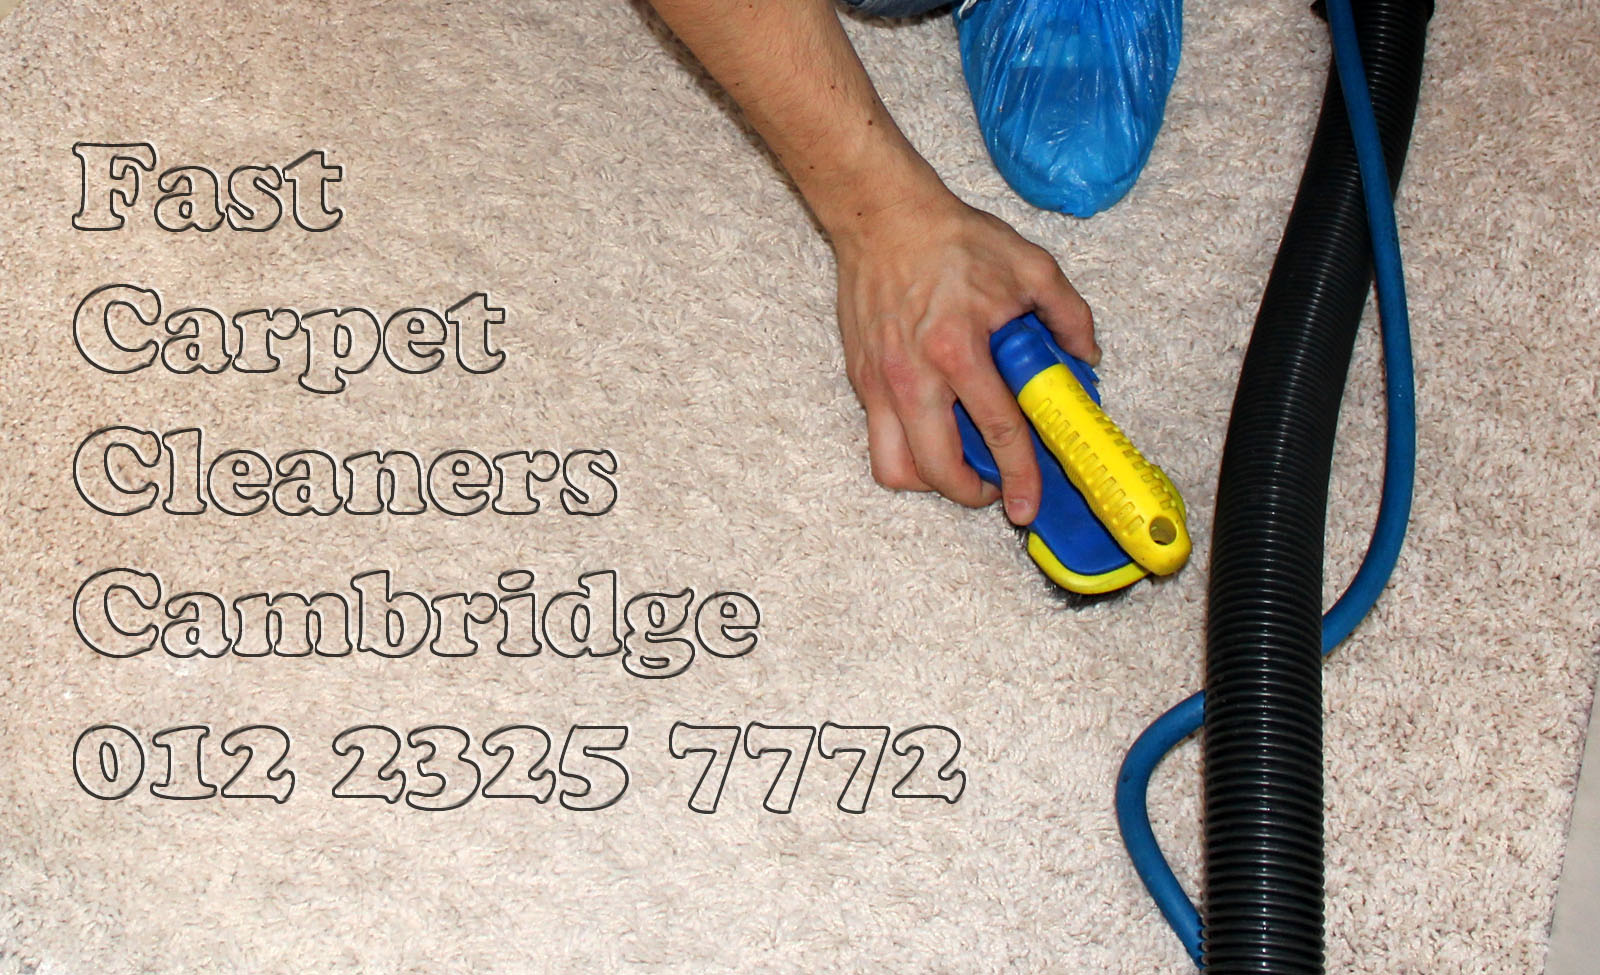 Carpet-Cleaning-Cleaners-Cambridge